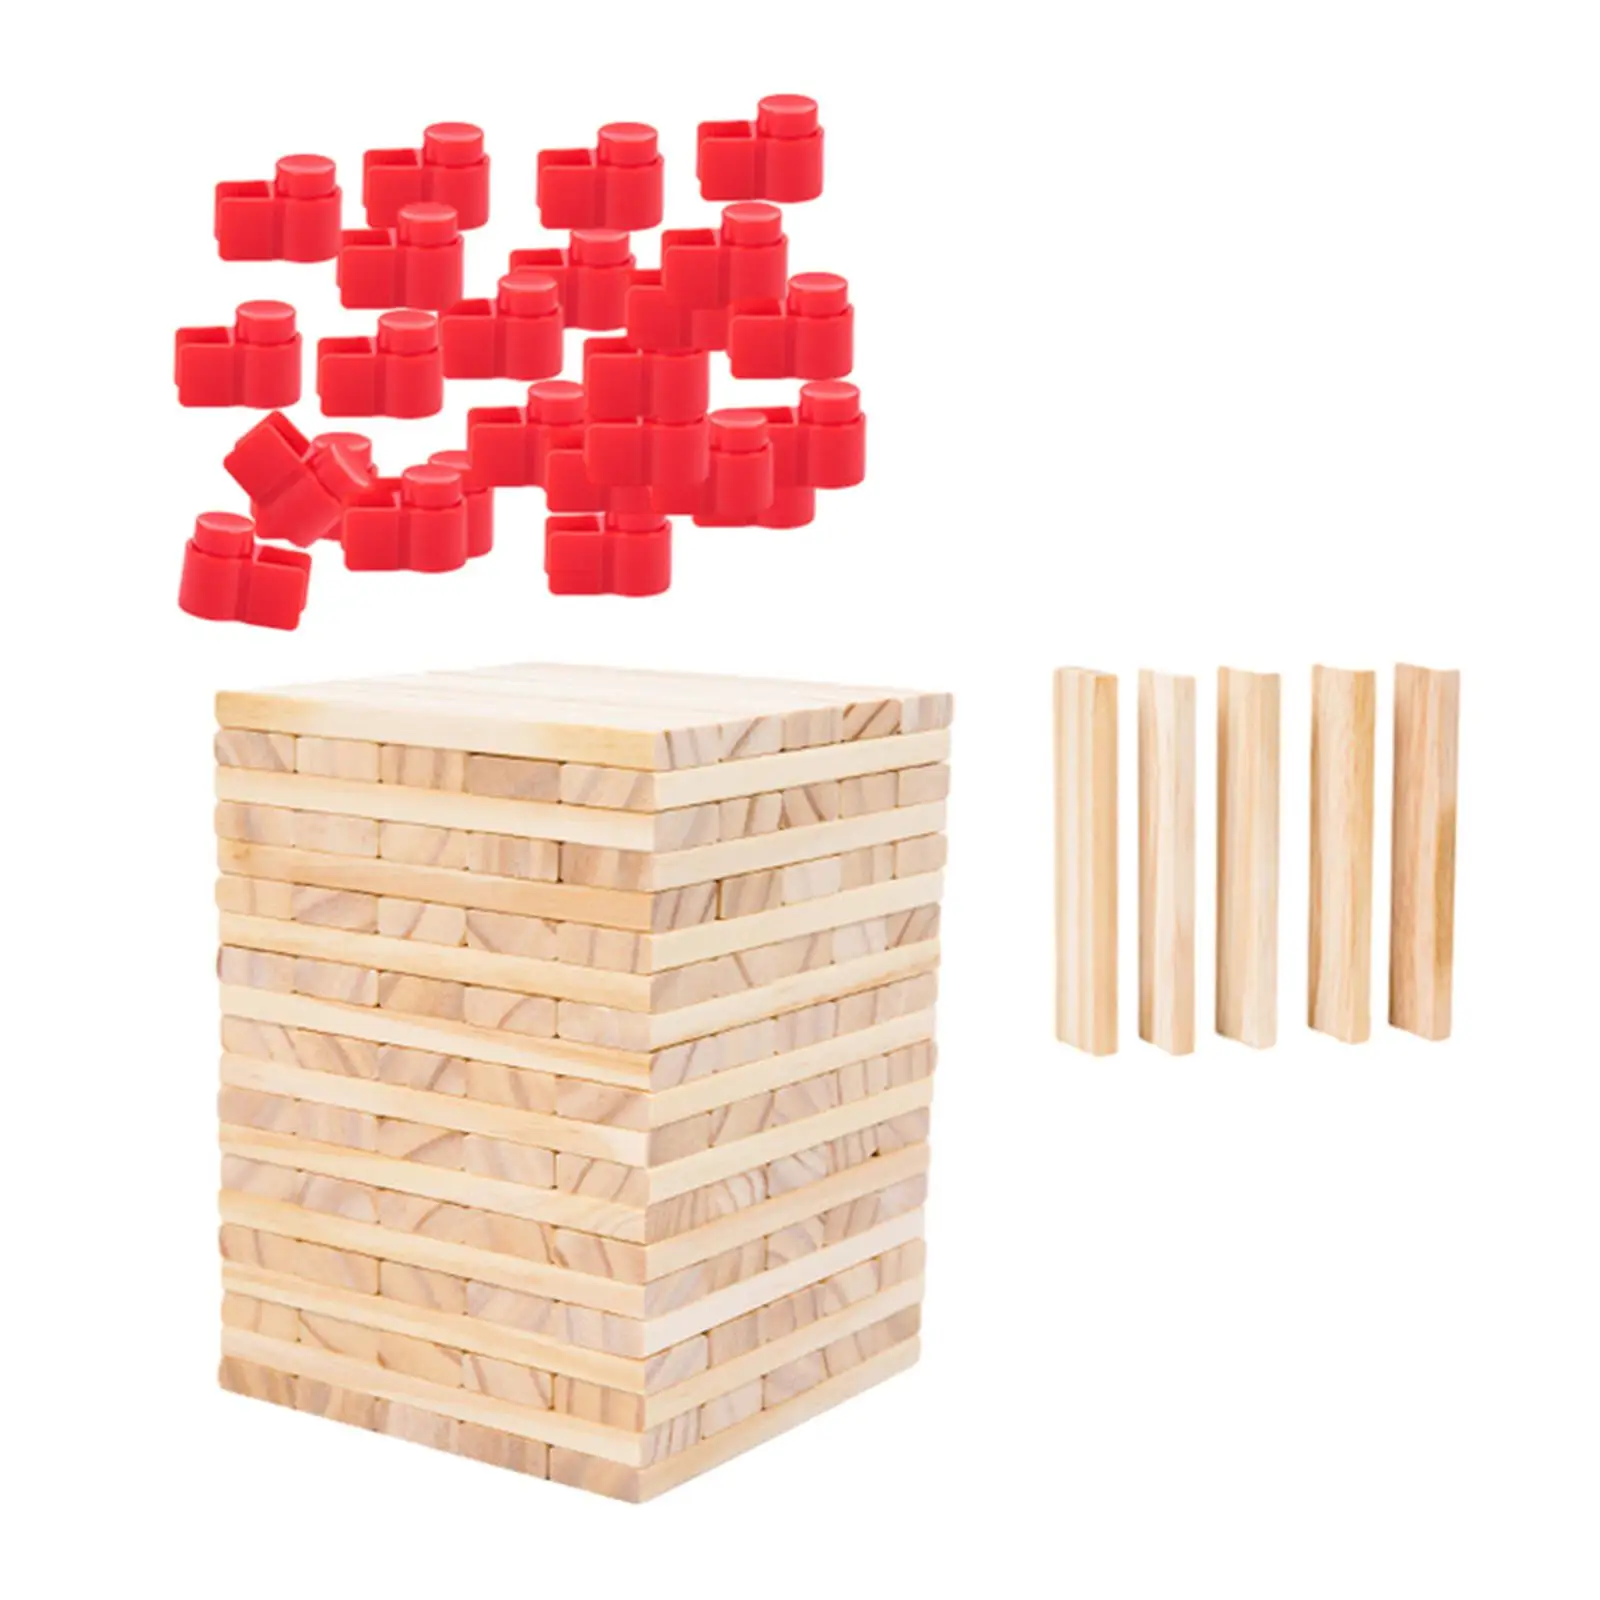 100 Pieces Wooden Stacking Games Preschool Learning Puzzles Montessori Toys for Festival Parties Birthday Gifts New Year Kids